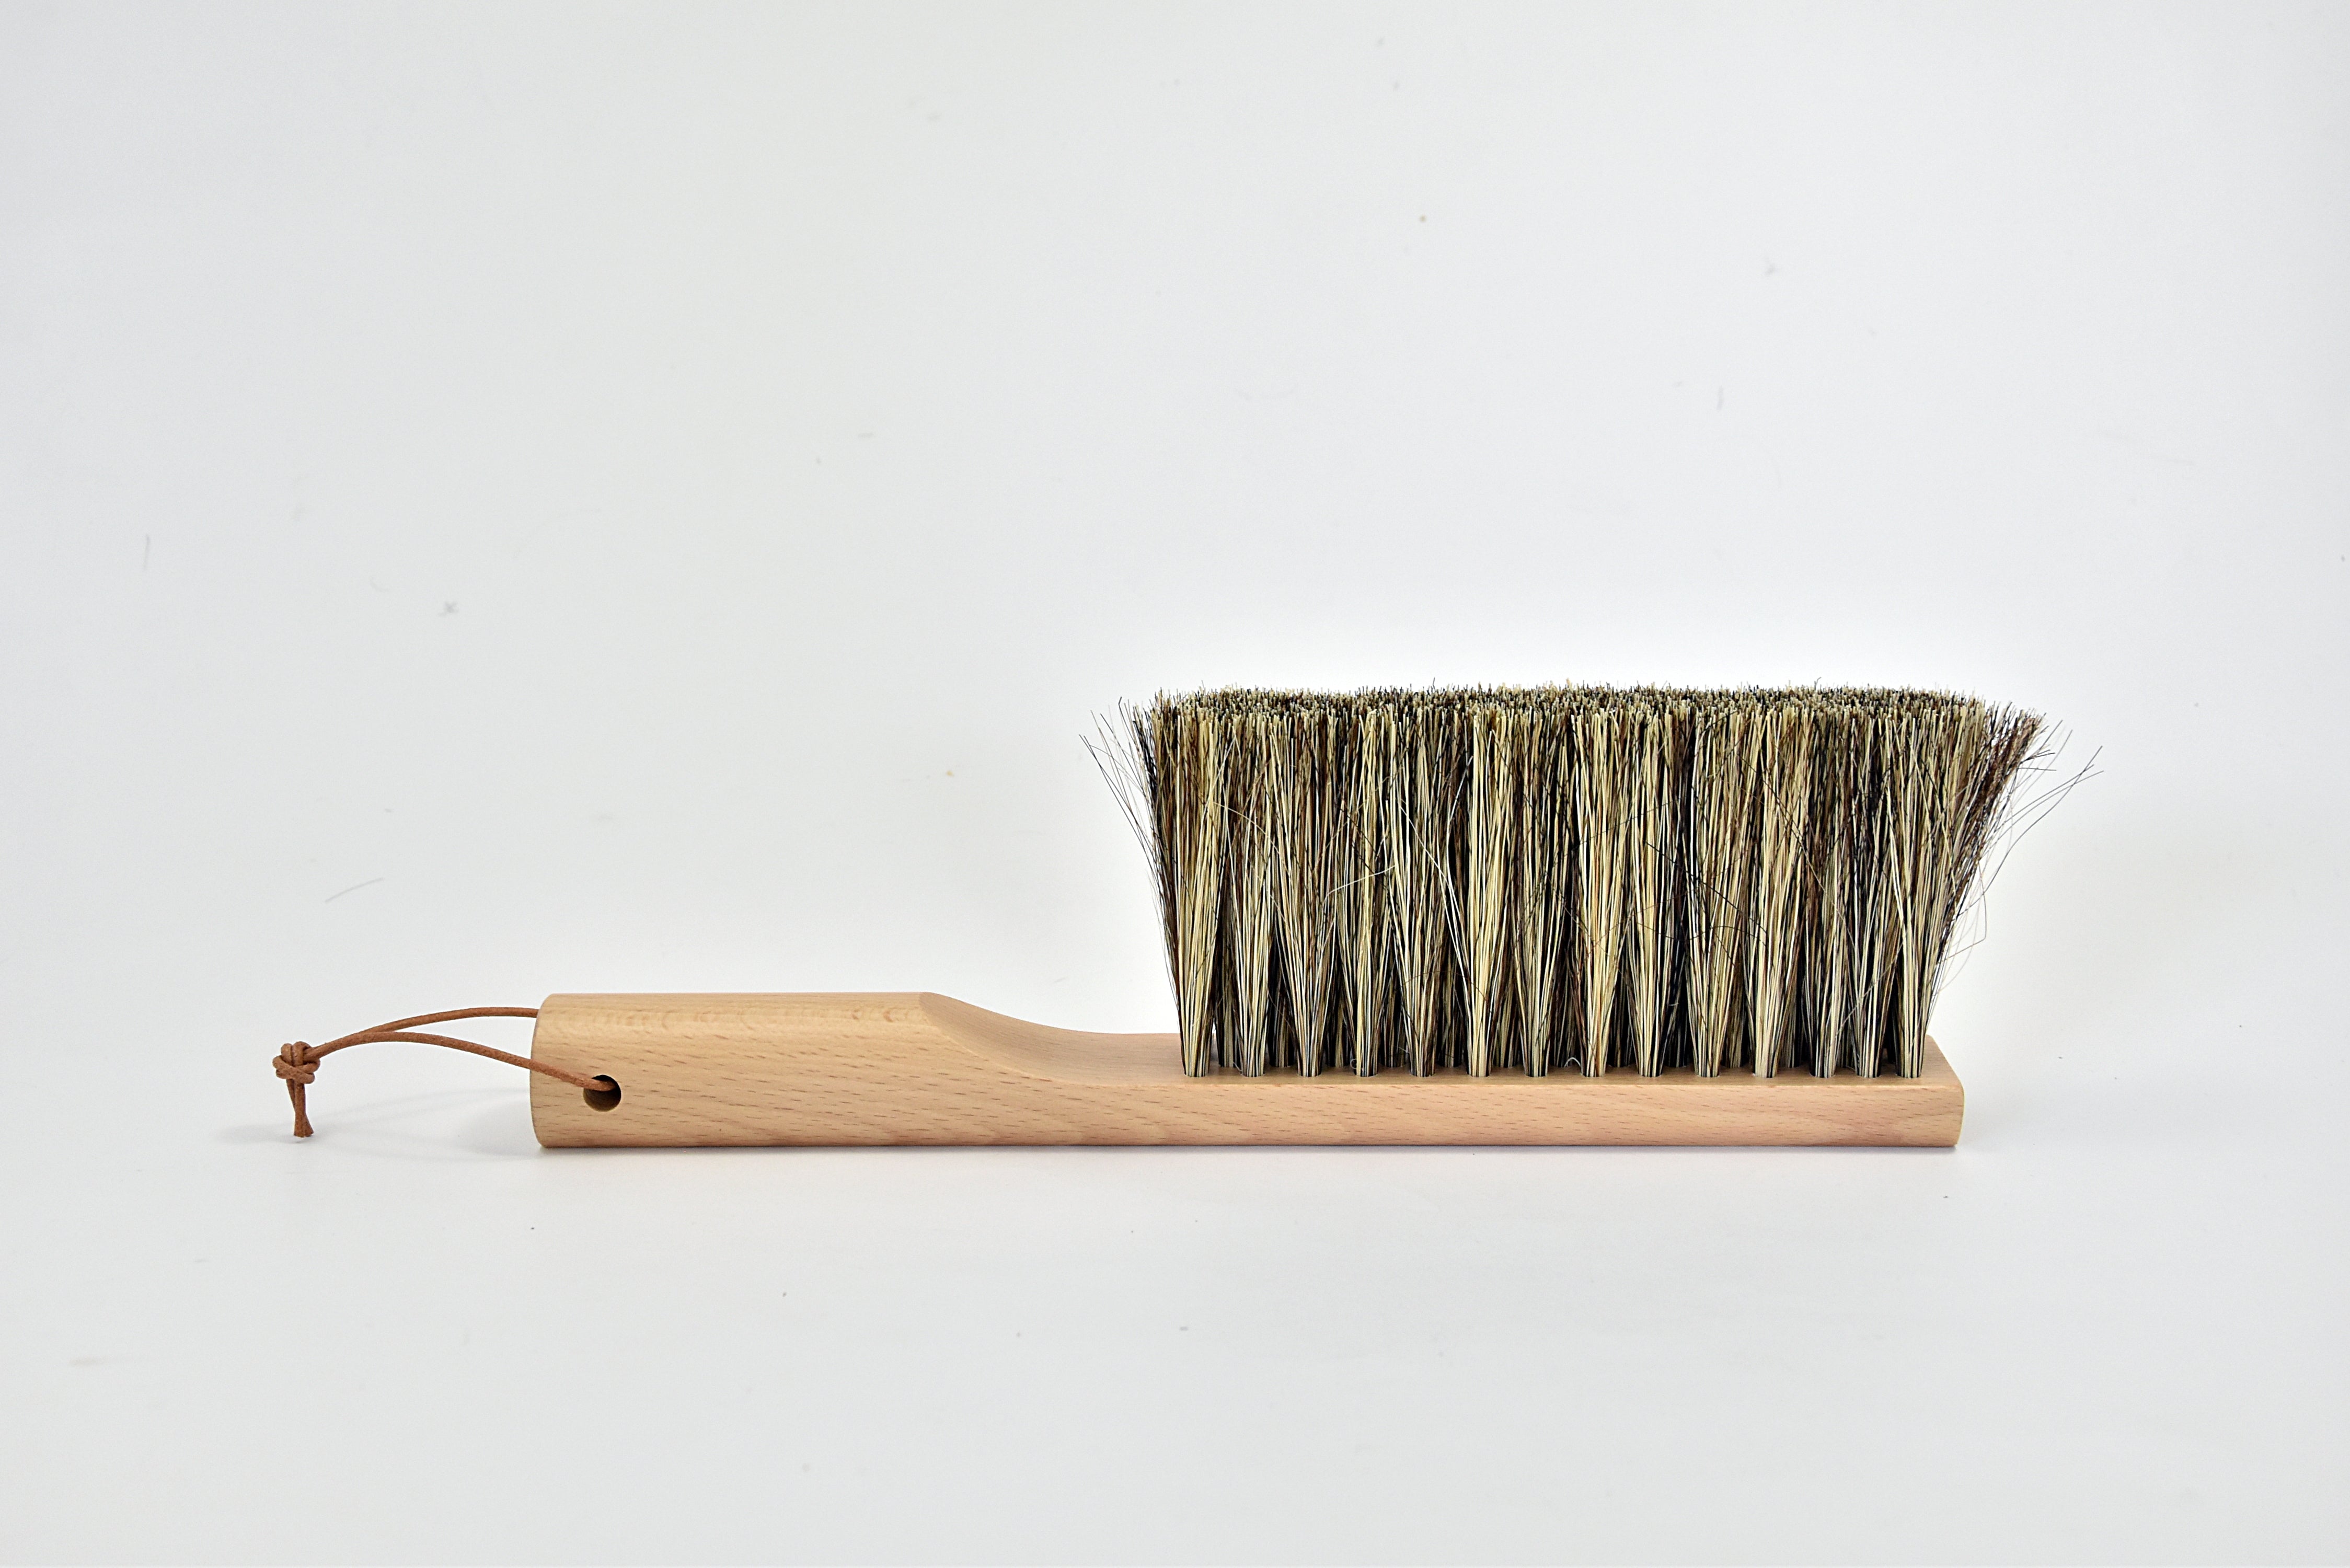 Andrée Jardin Mr. and Mrs. Clynk Dustpan & Natural Brush with Wall Hooks Set "Coffret" Gift Set Utilities Andrée Jardin Back in stock Brand_Andrée Jardin Home_Broom Sets Home_Household Cleaning New Arrivals balayette-design-clynk-nature-3322_bb2798a2-3d19-4fad-88b7-16807f8da84a